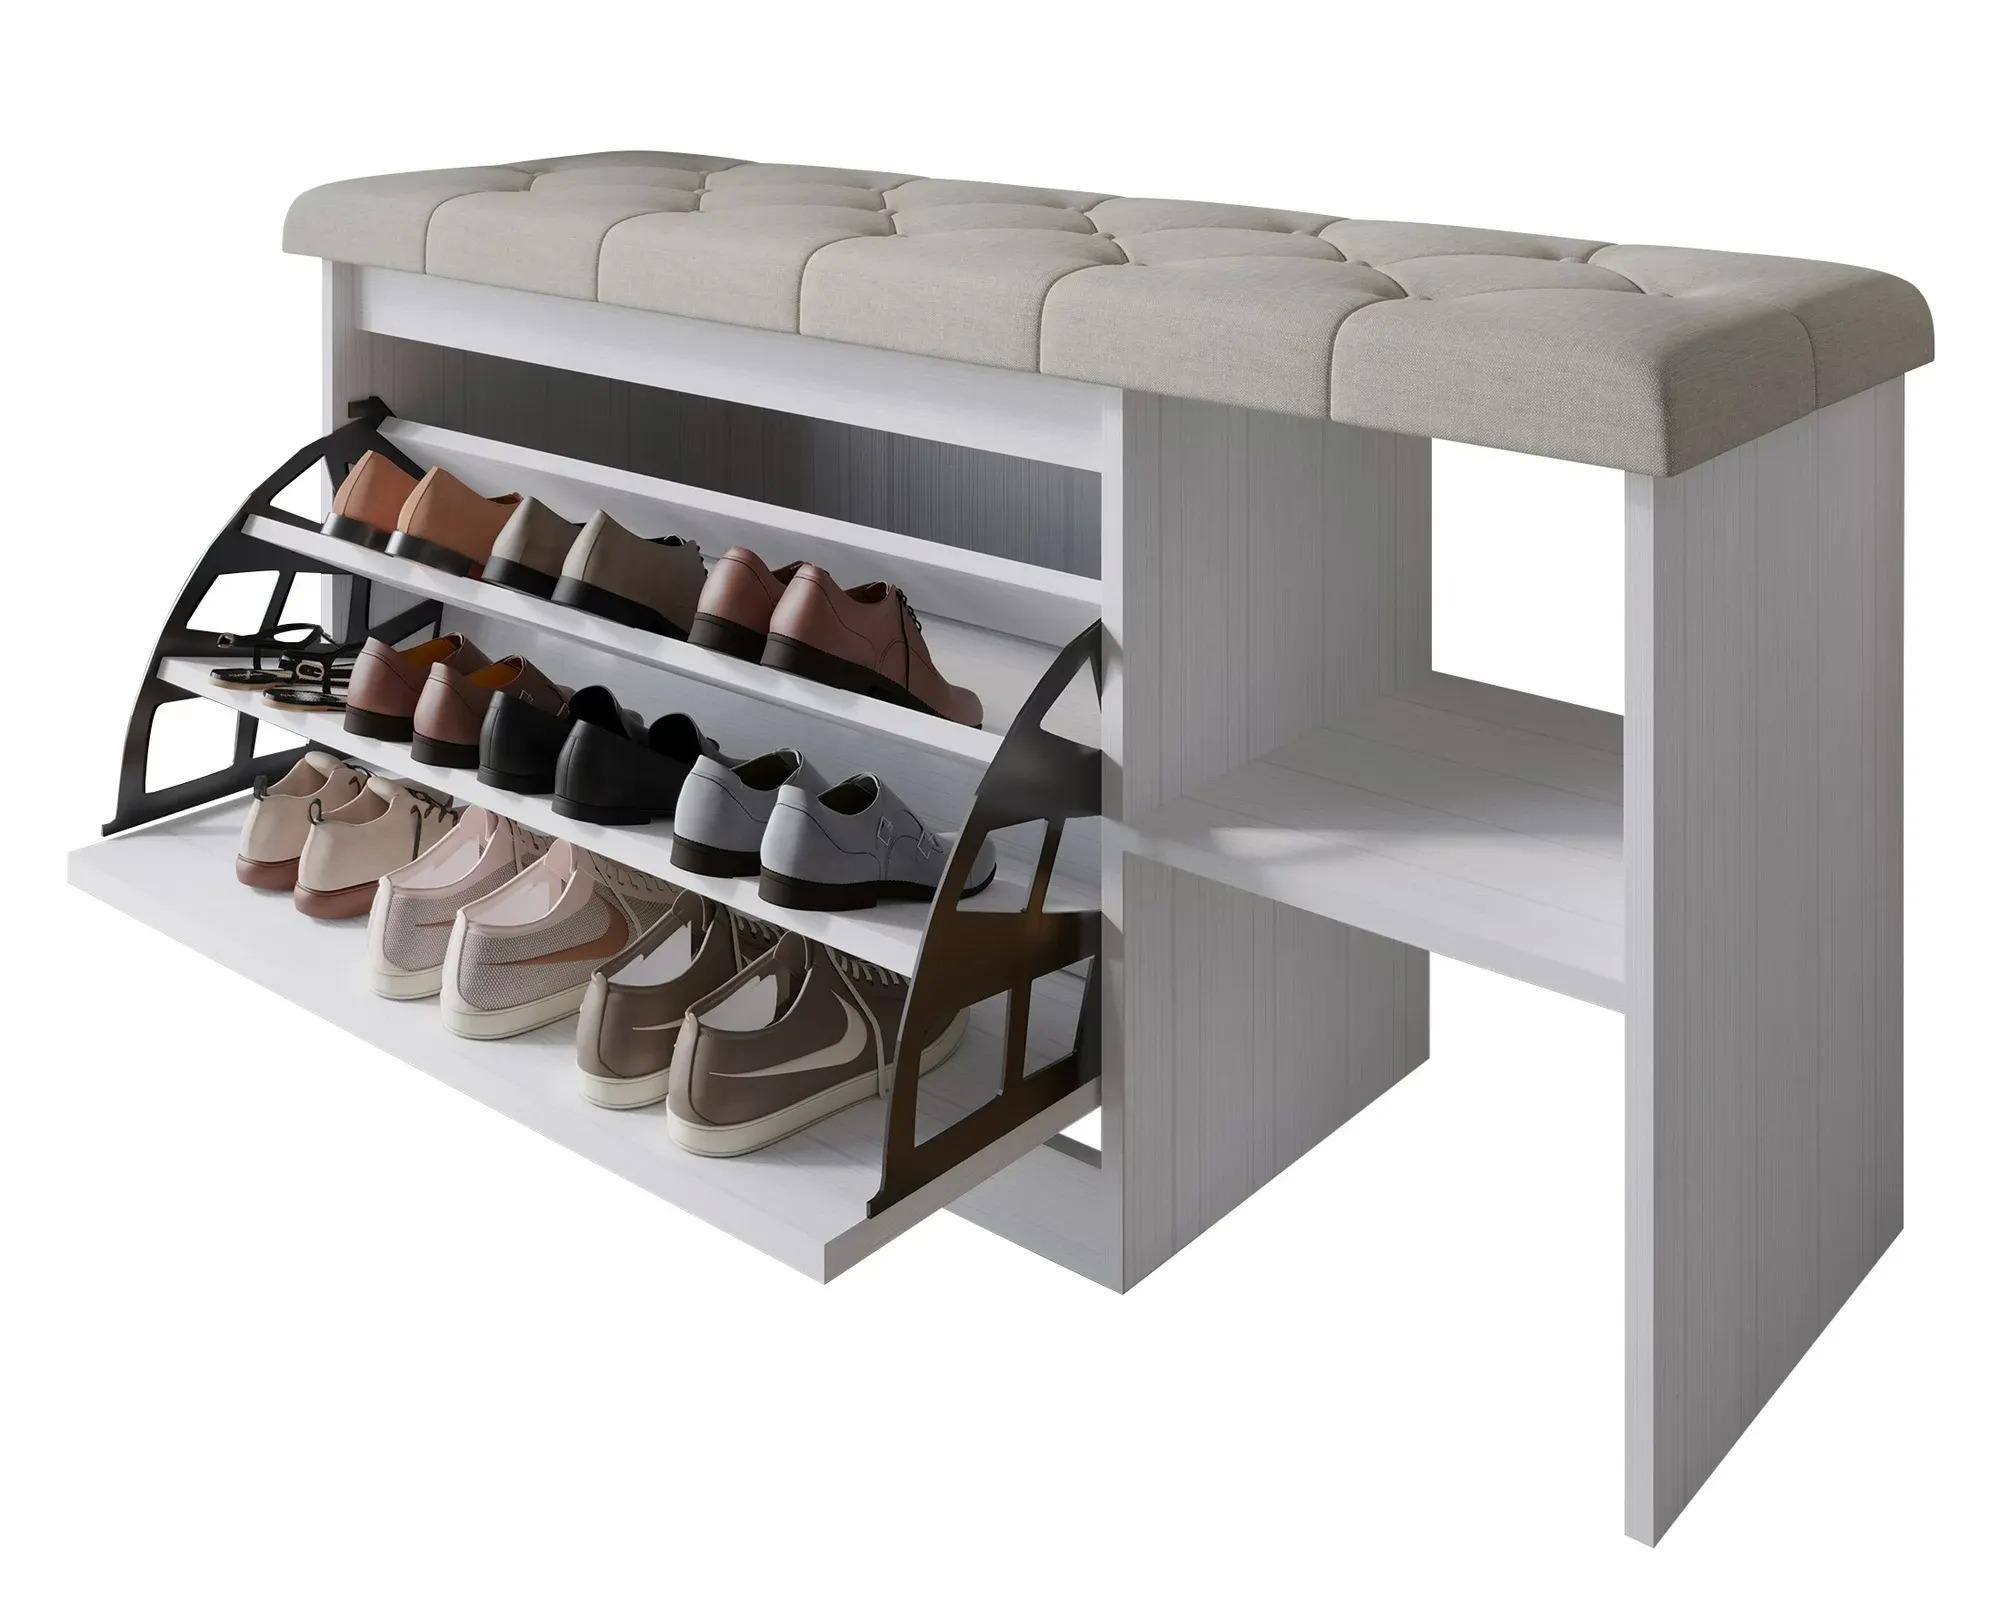 Castle Place Upholstered 41x22 Bench with Shoe Storage for $77 Shipped